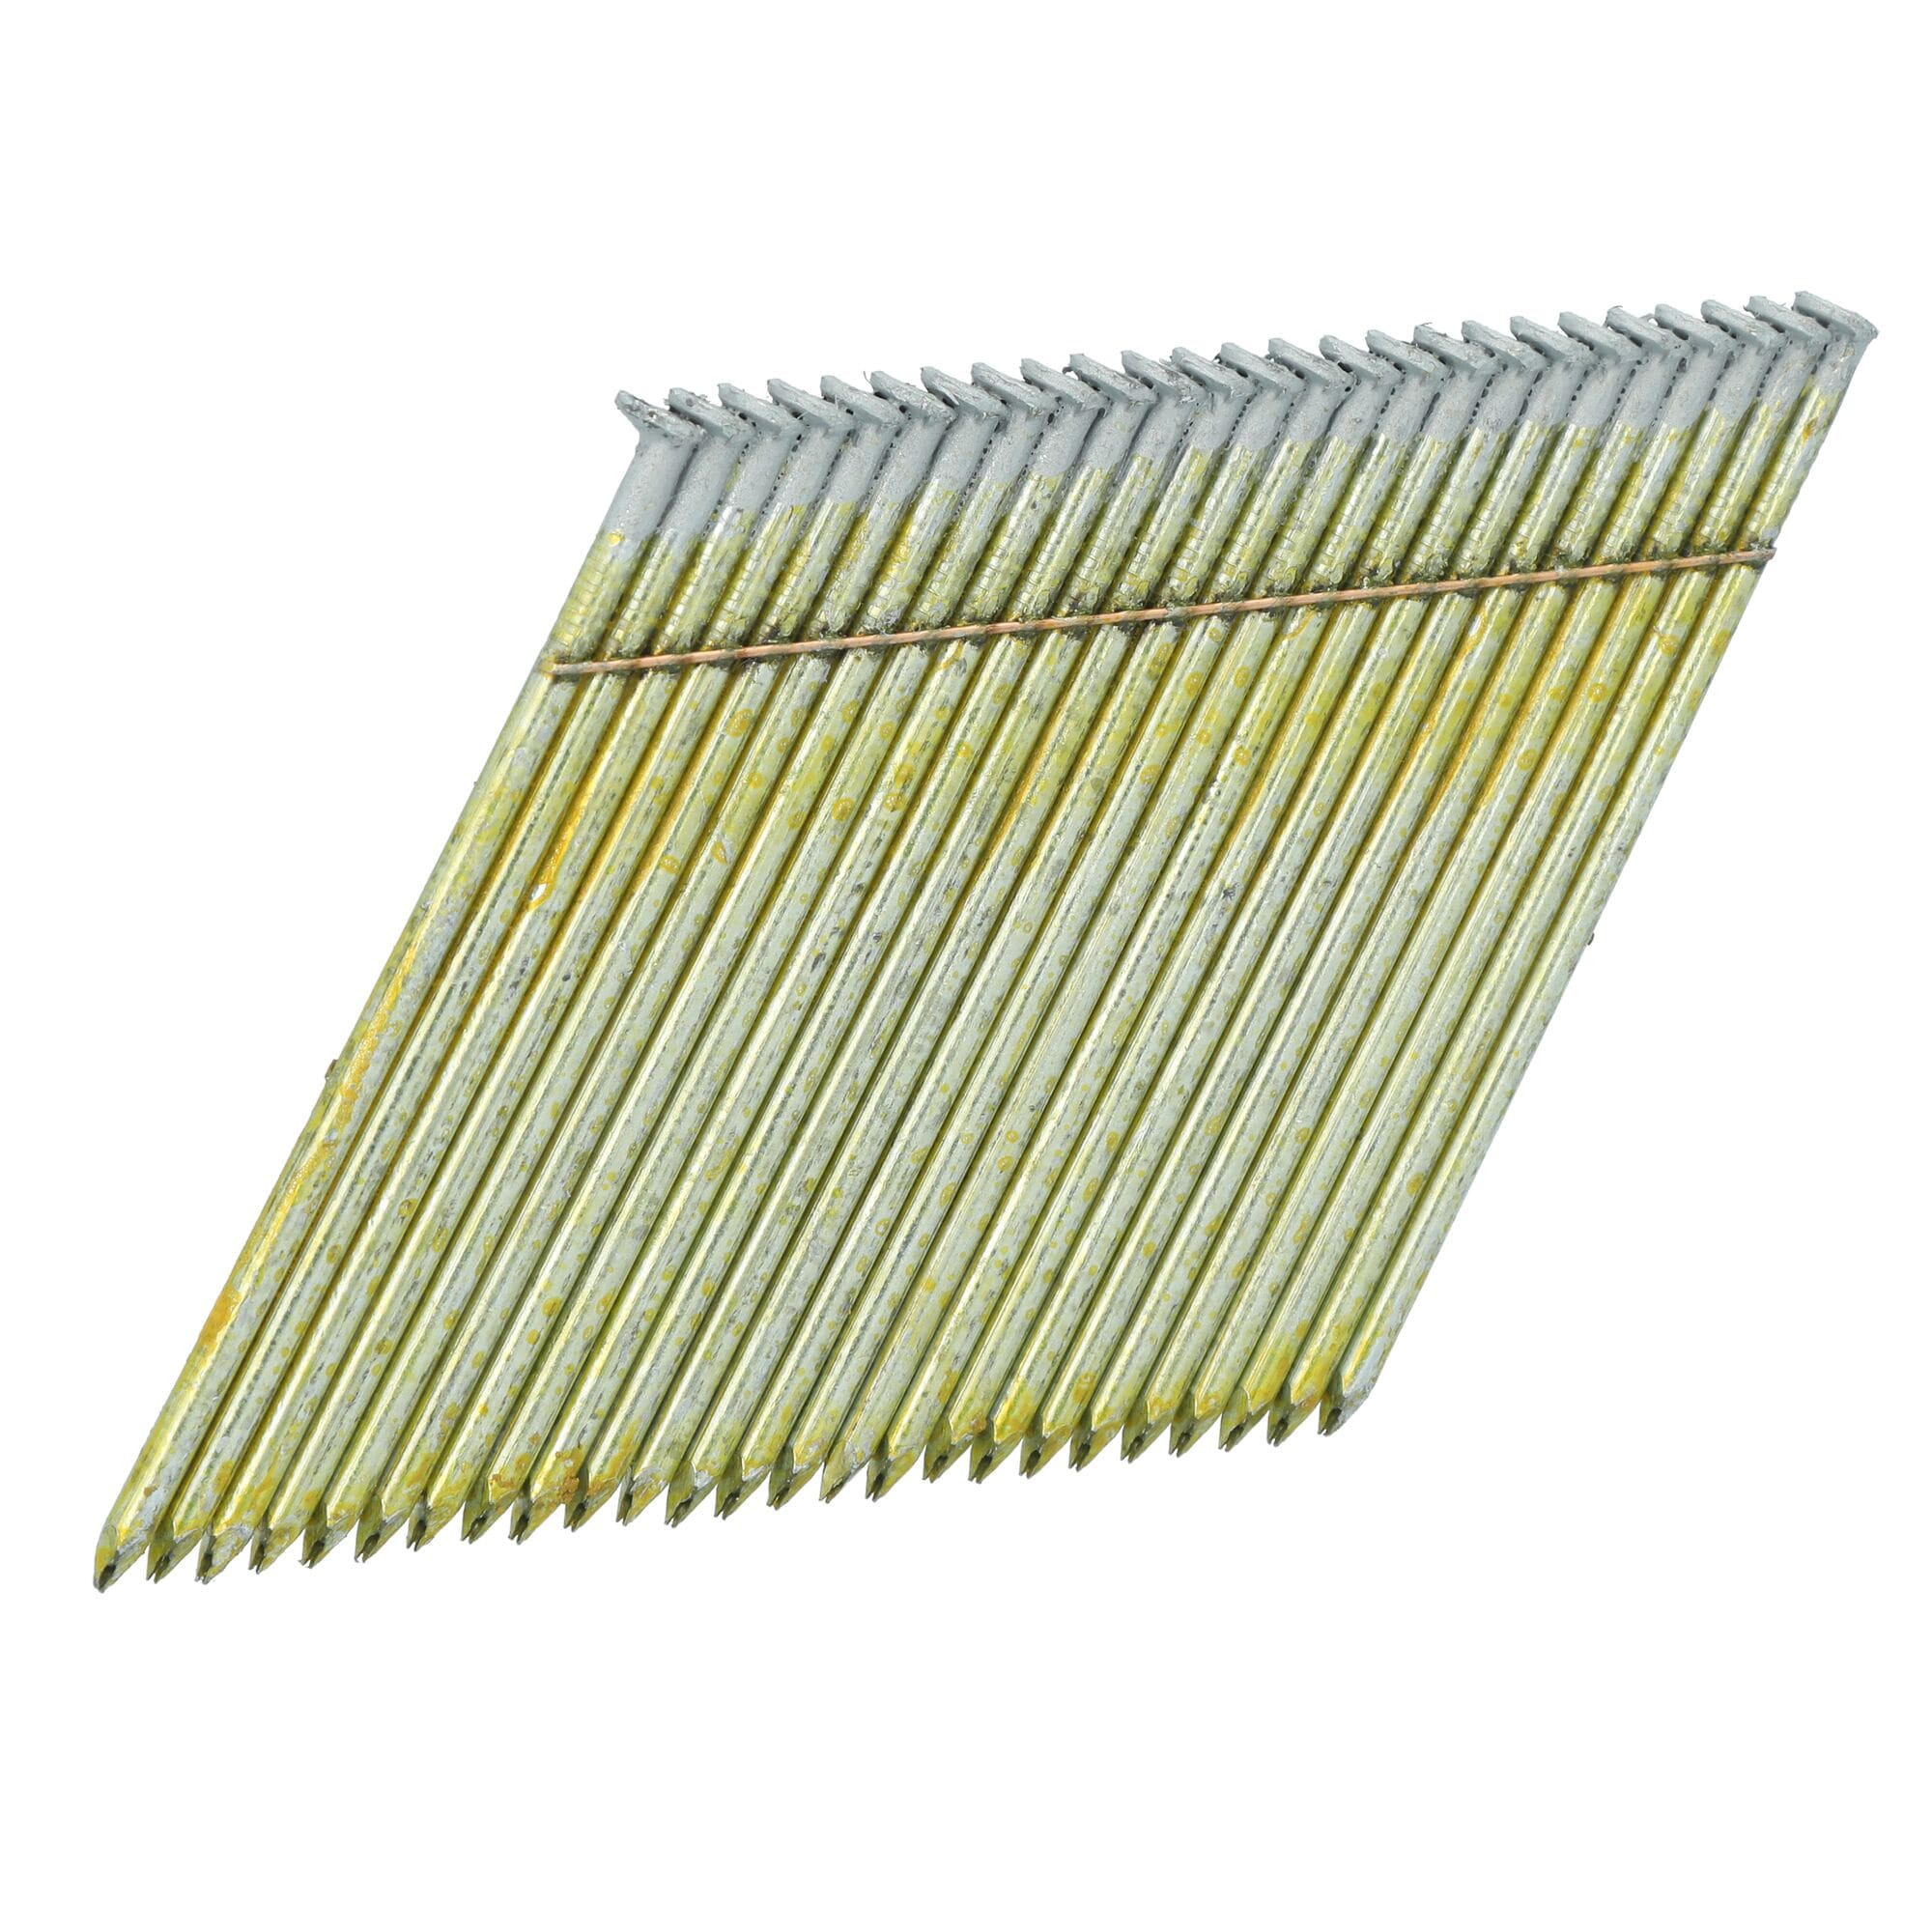 Bostitch 3-1/4-in x 0.12-in 28 Degree Galvanized Smooth Collated ...